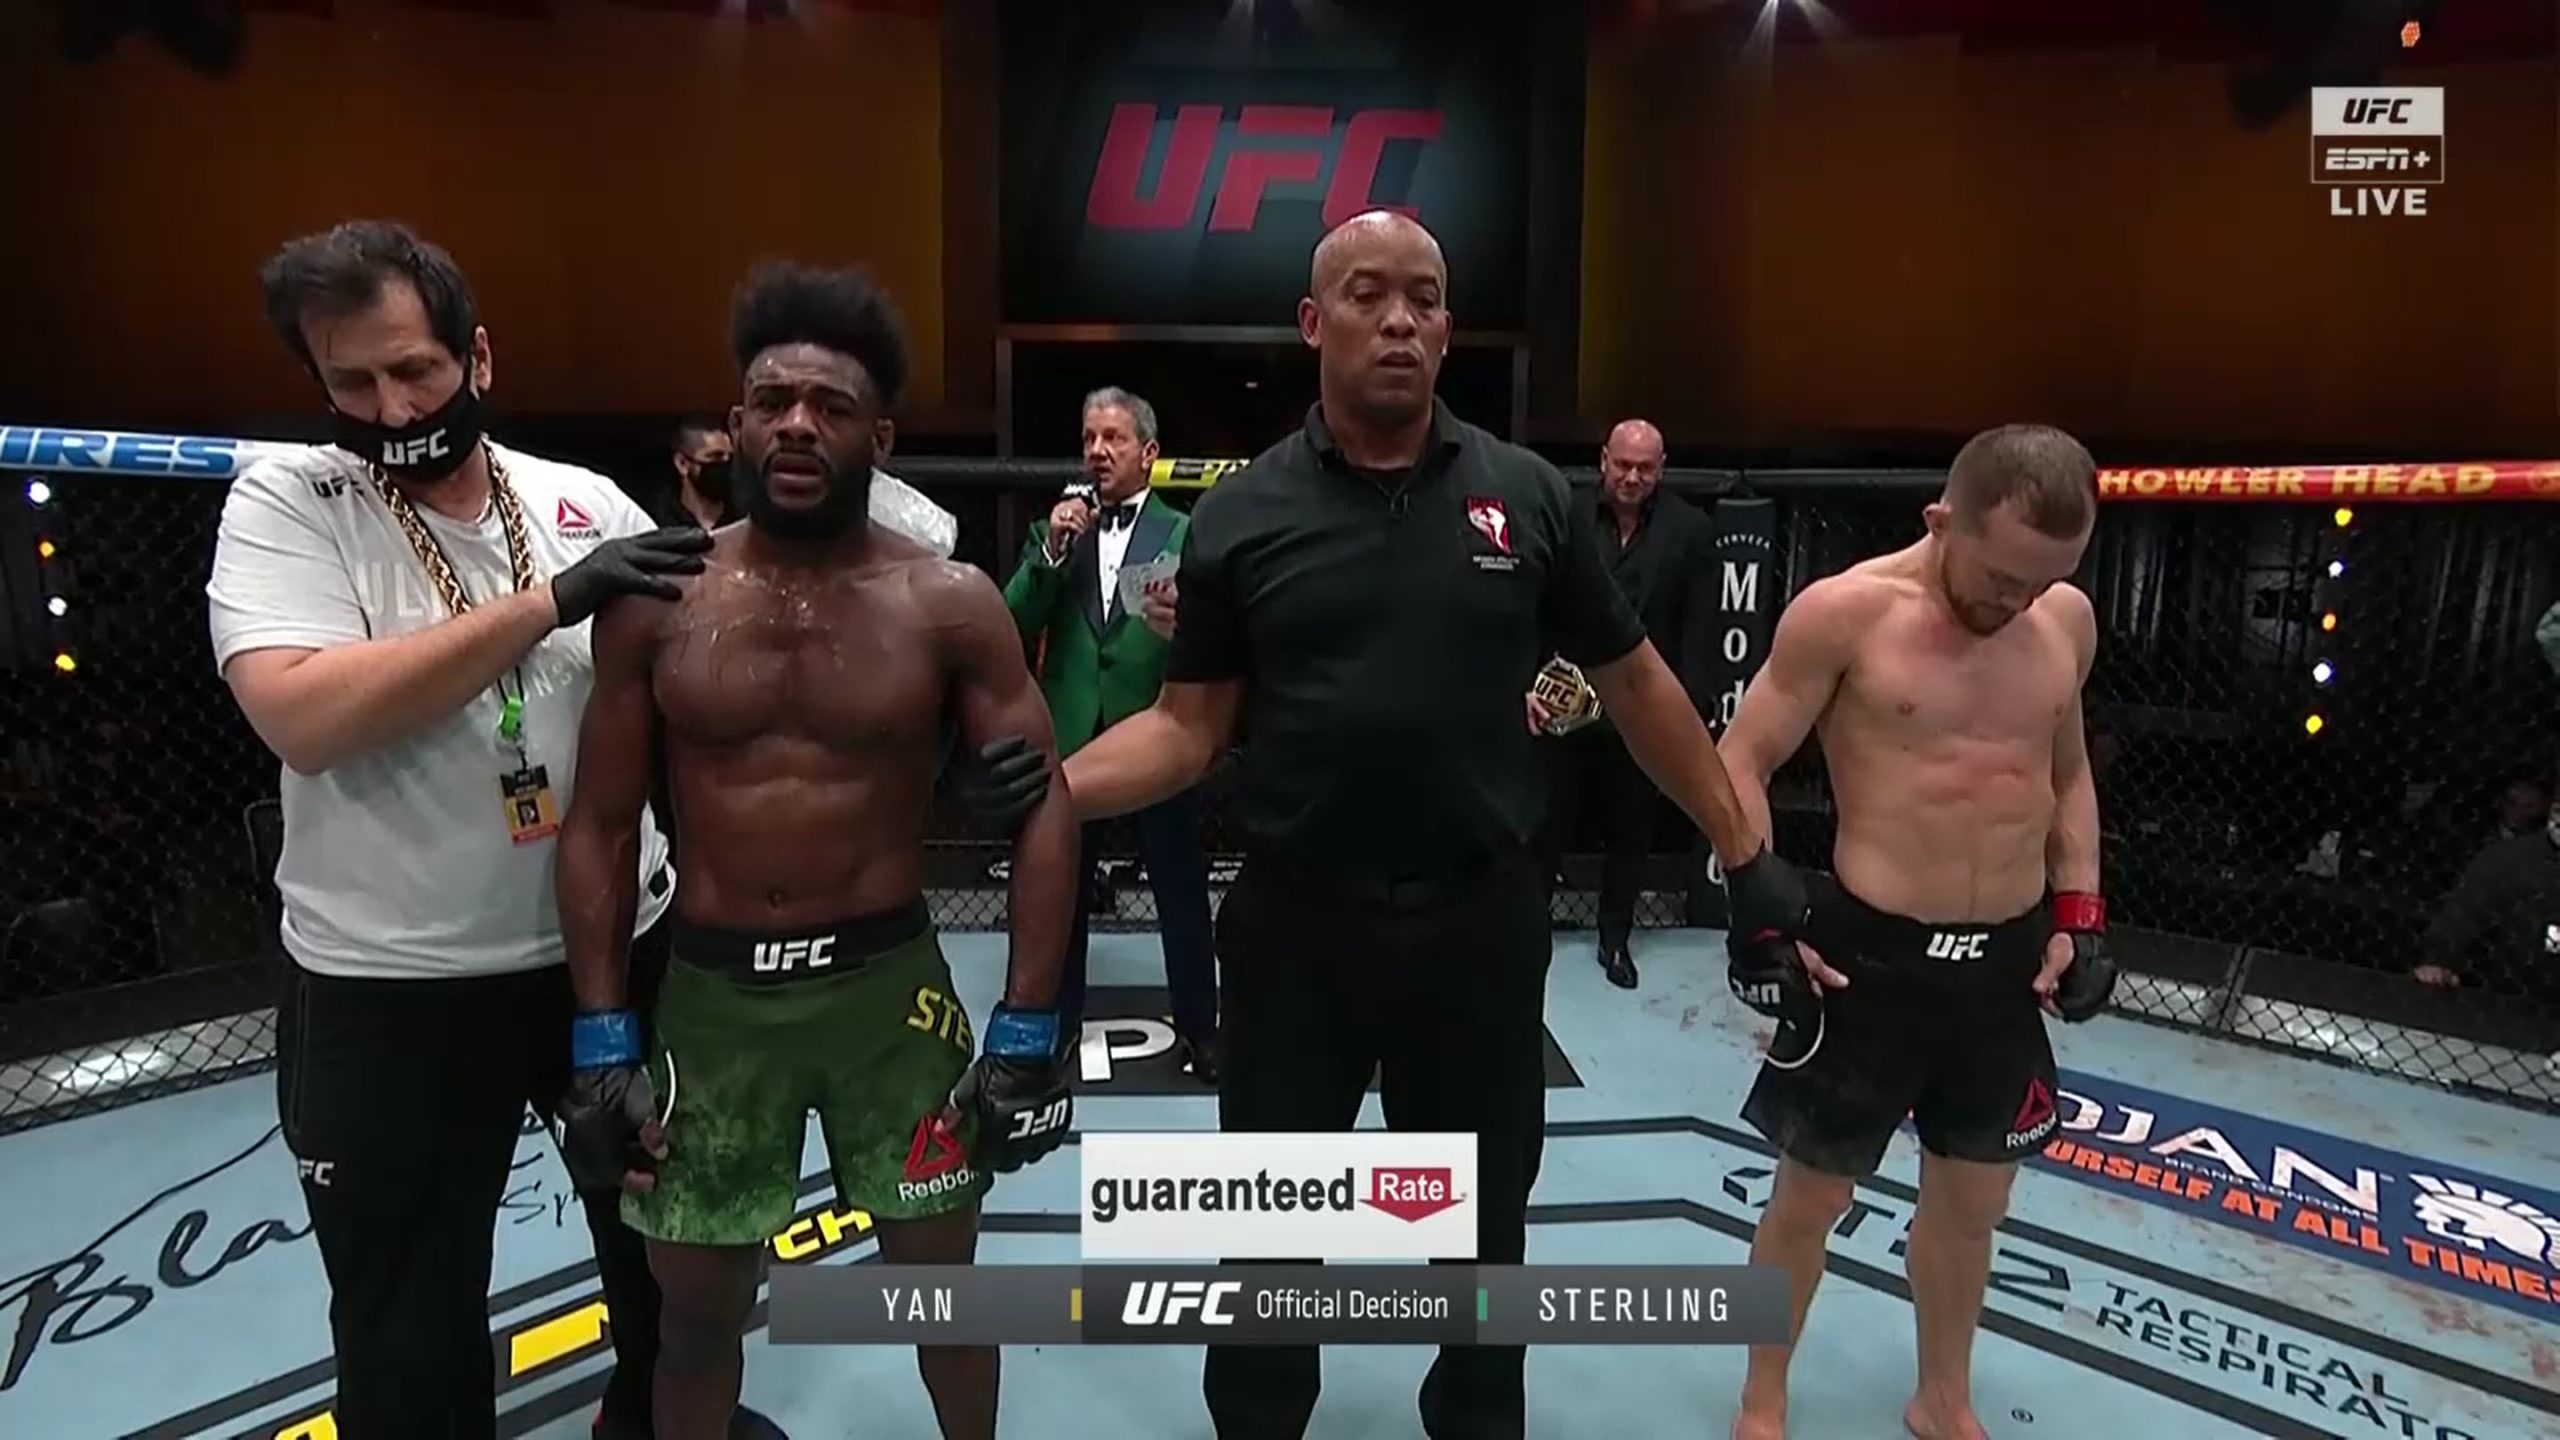 Aljamain Sterling Crowned New Bantamweight Champion at UFC 259 After Controversial Finish